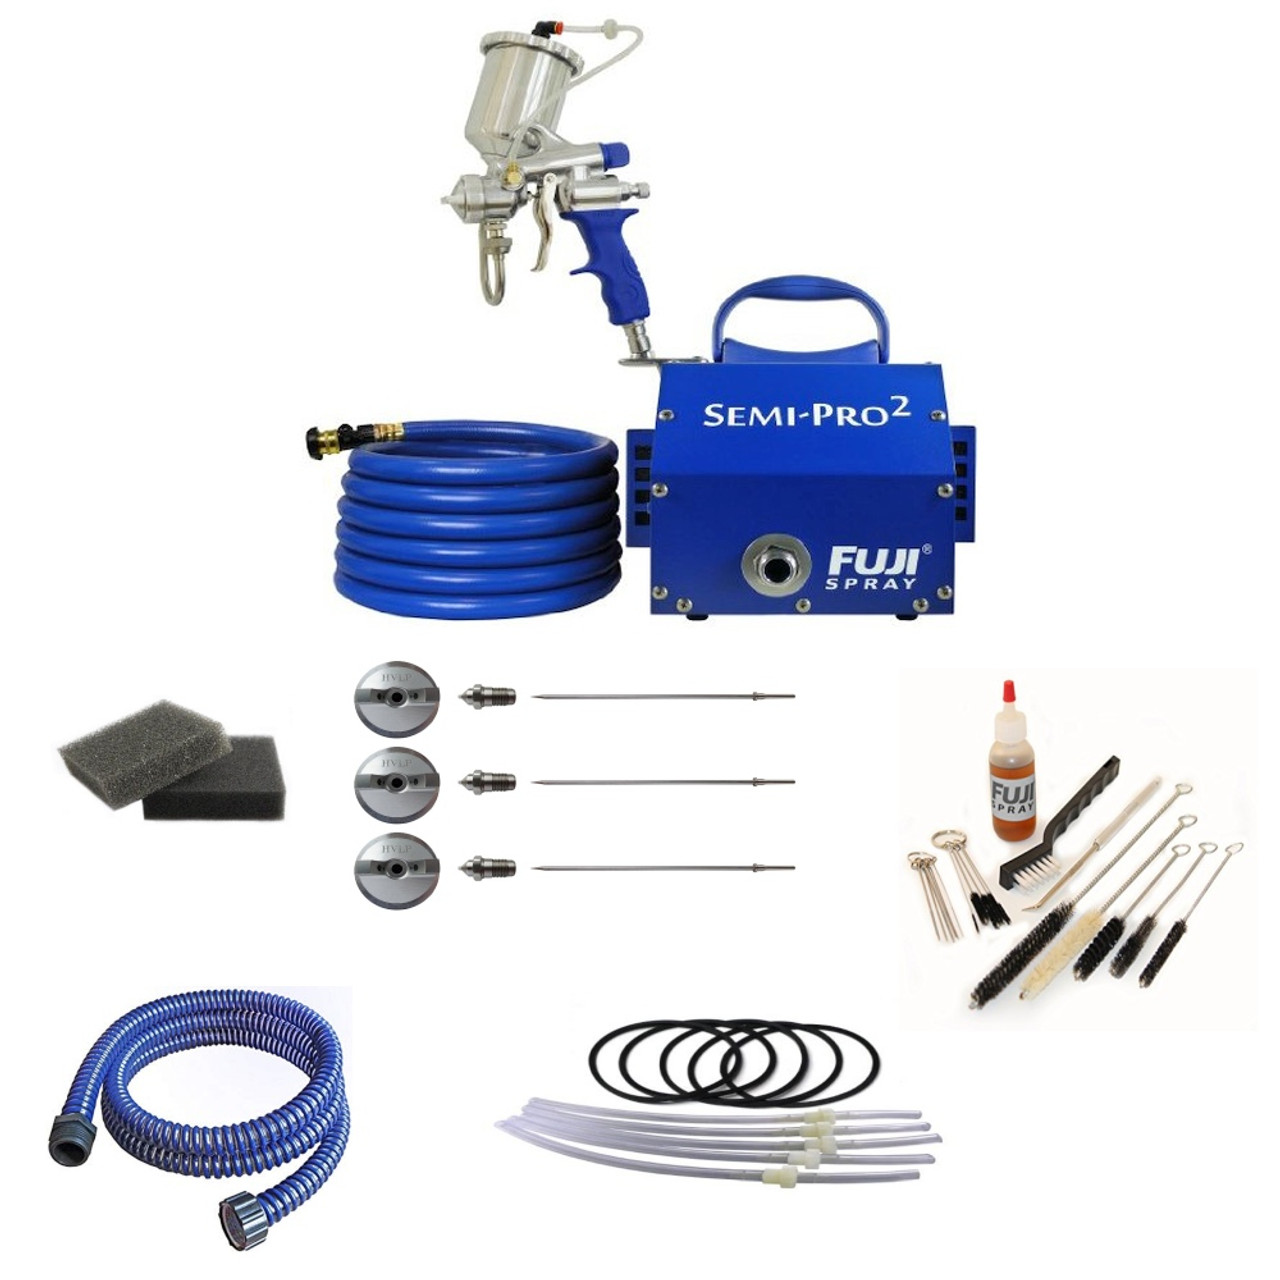 Fuji 2203G Semi-PRO 2 Gravity Feed HVLP Paint Sprayer System and Accessories